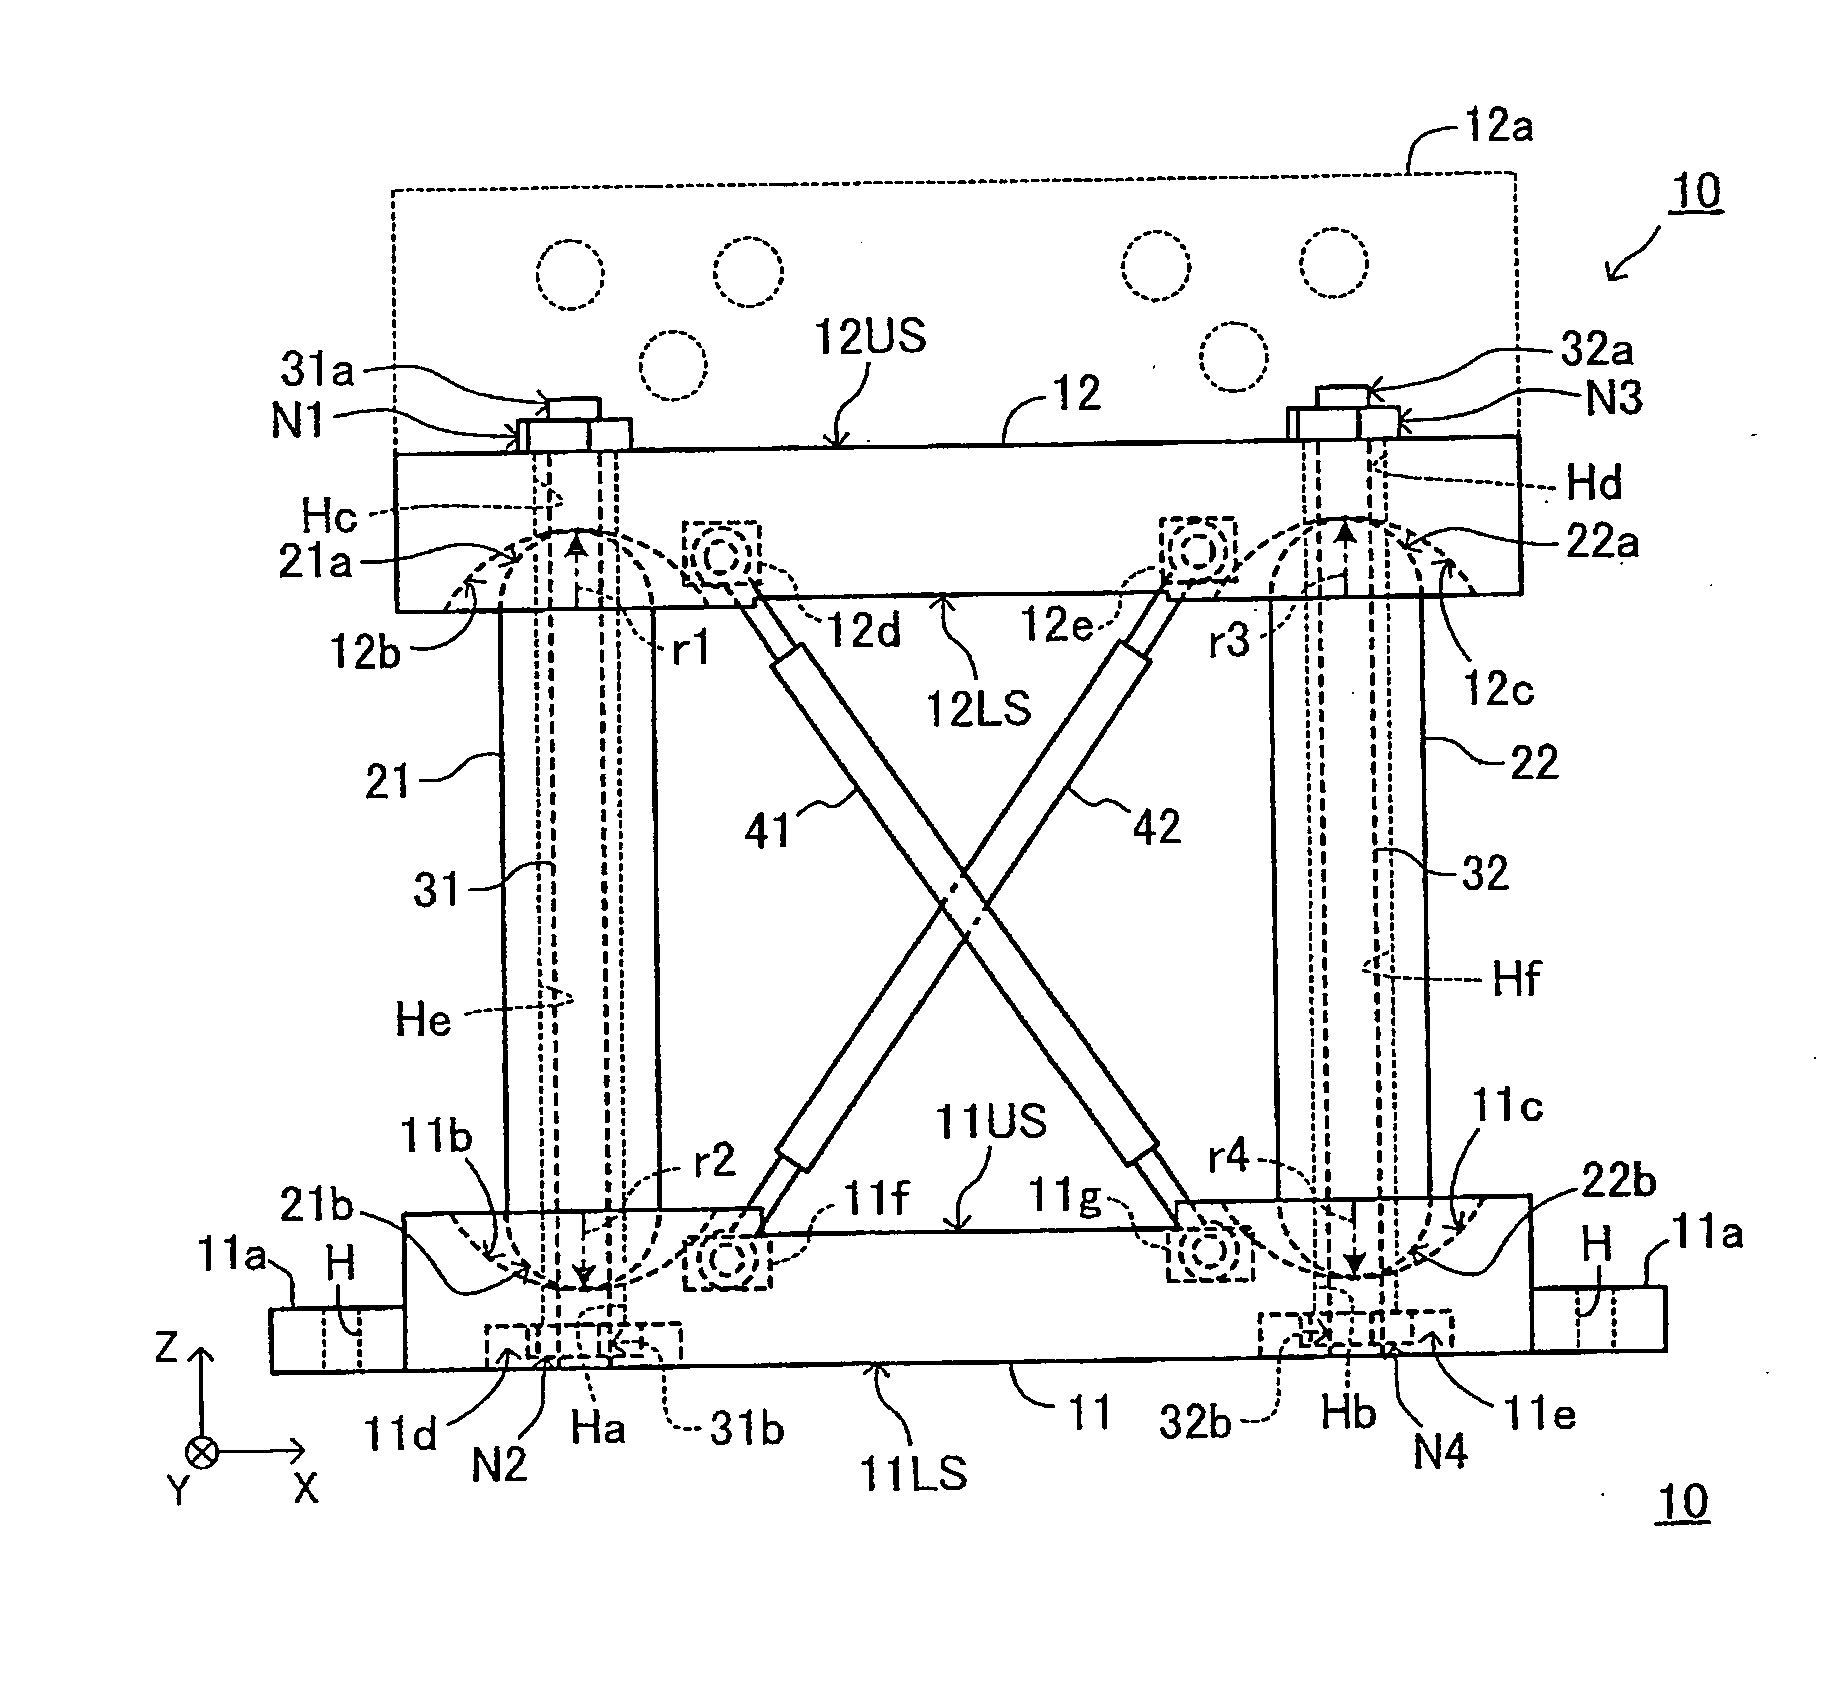 Self-centering compact damper unit applicable to structures for seismic energy dissipation